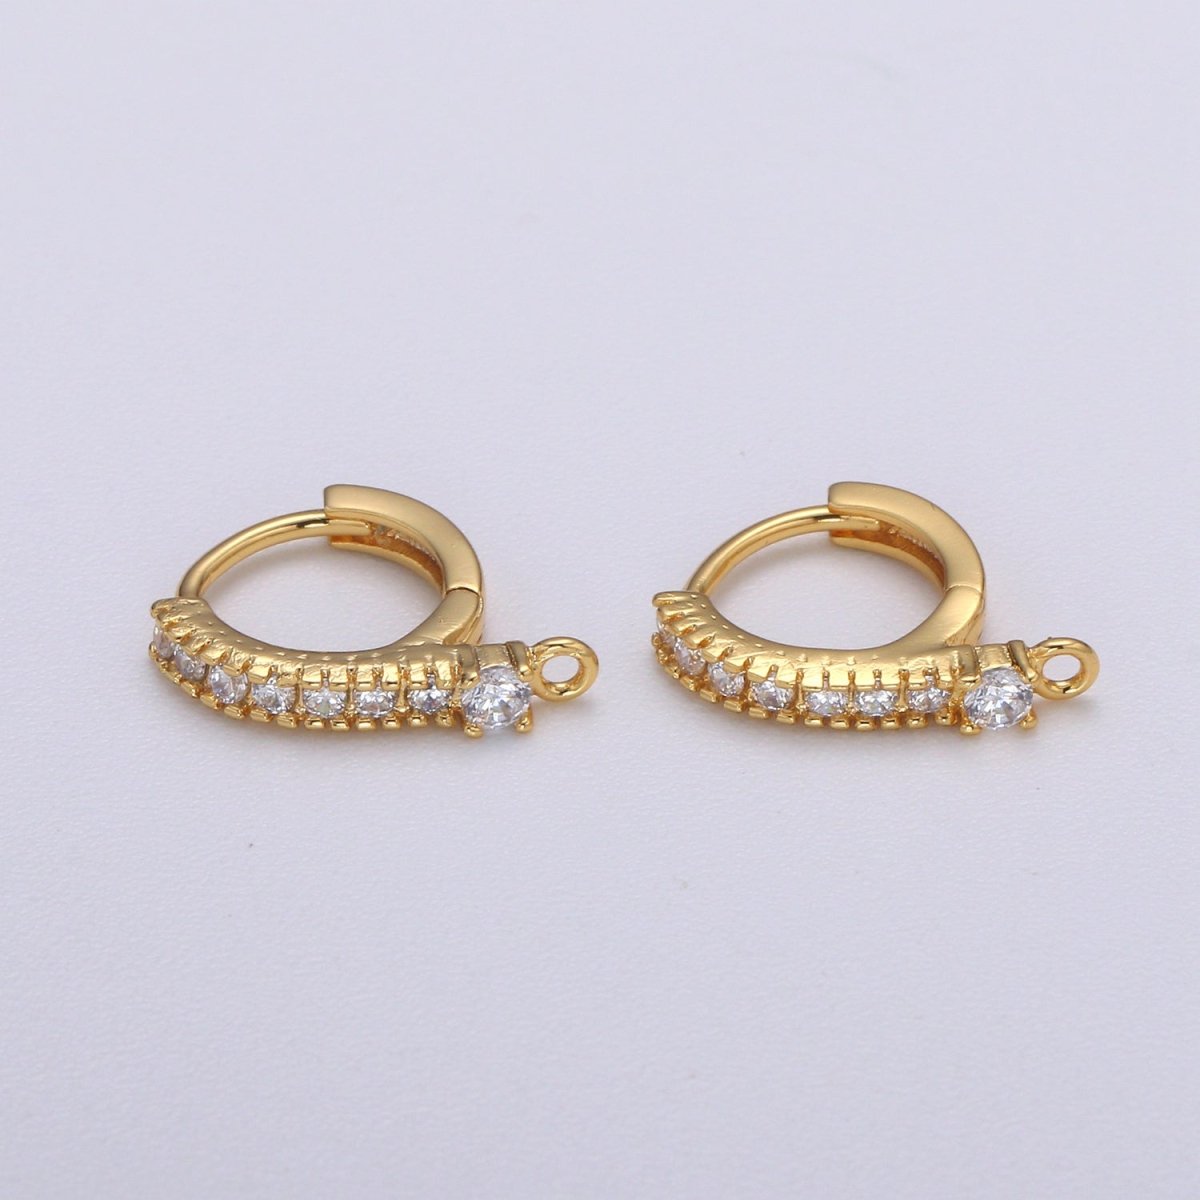 Lever Back Earring Mini Huggie Earring 24K Gold Filled Cz Micro Pave Hoops with open link for Jewelry Making Supply L-234 - DLUXCA